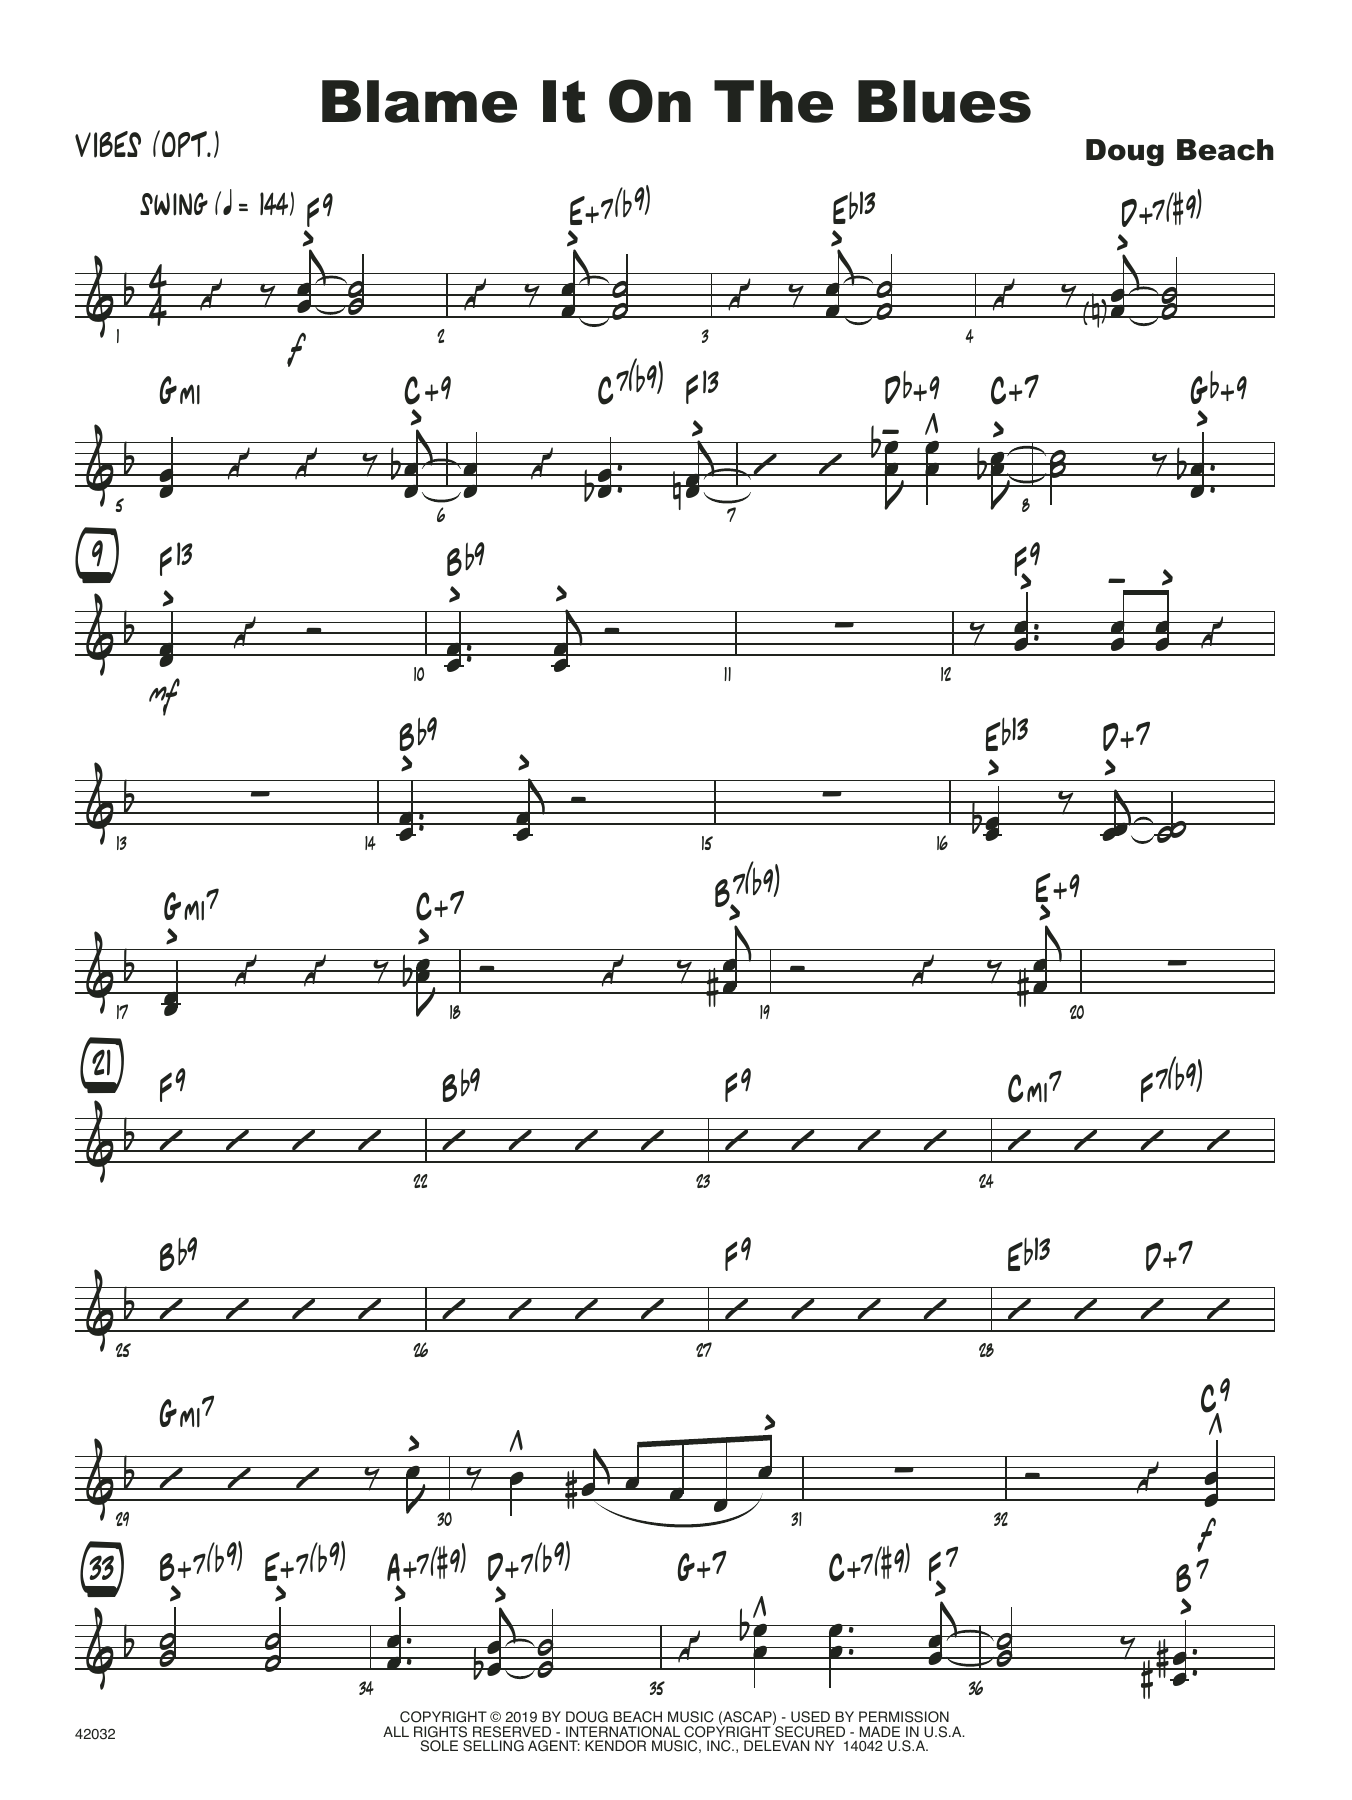 Download Doug Beach Blame It On The Blues - Vibes Sheet Music